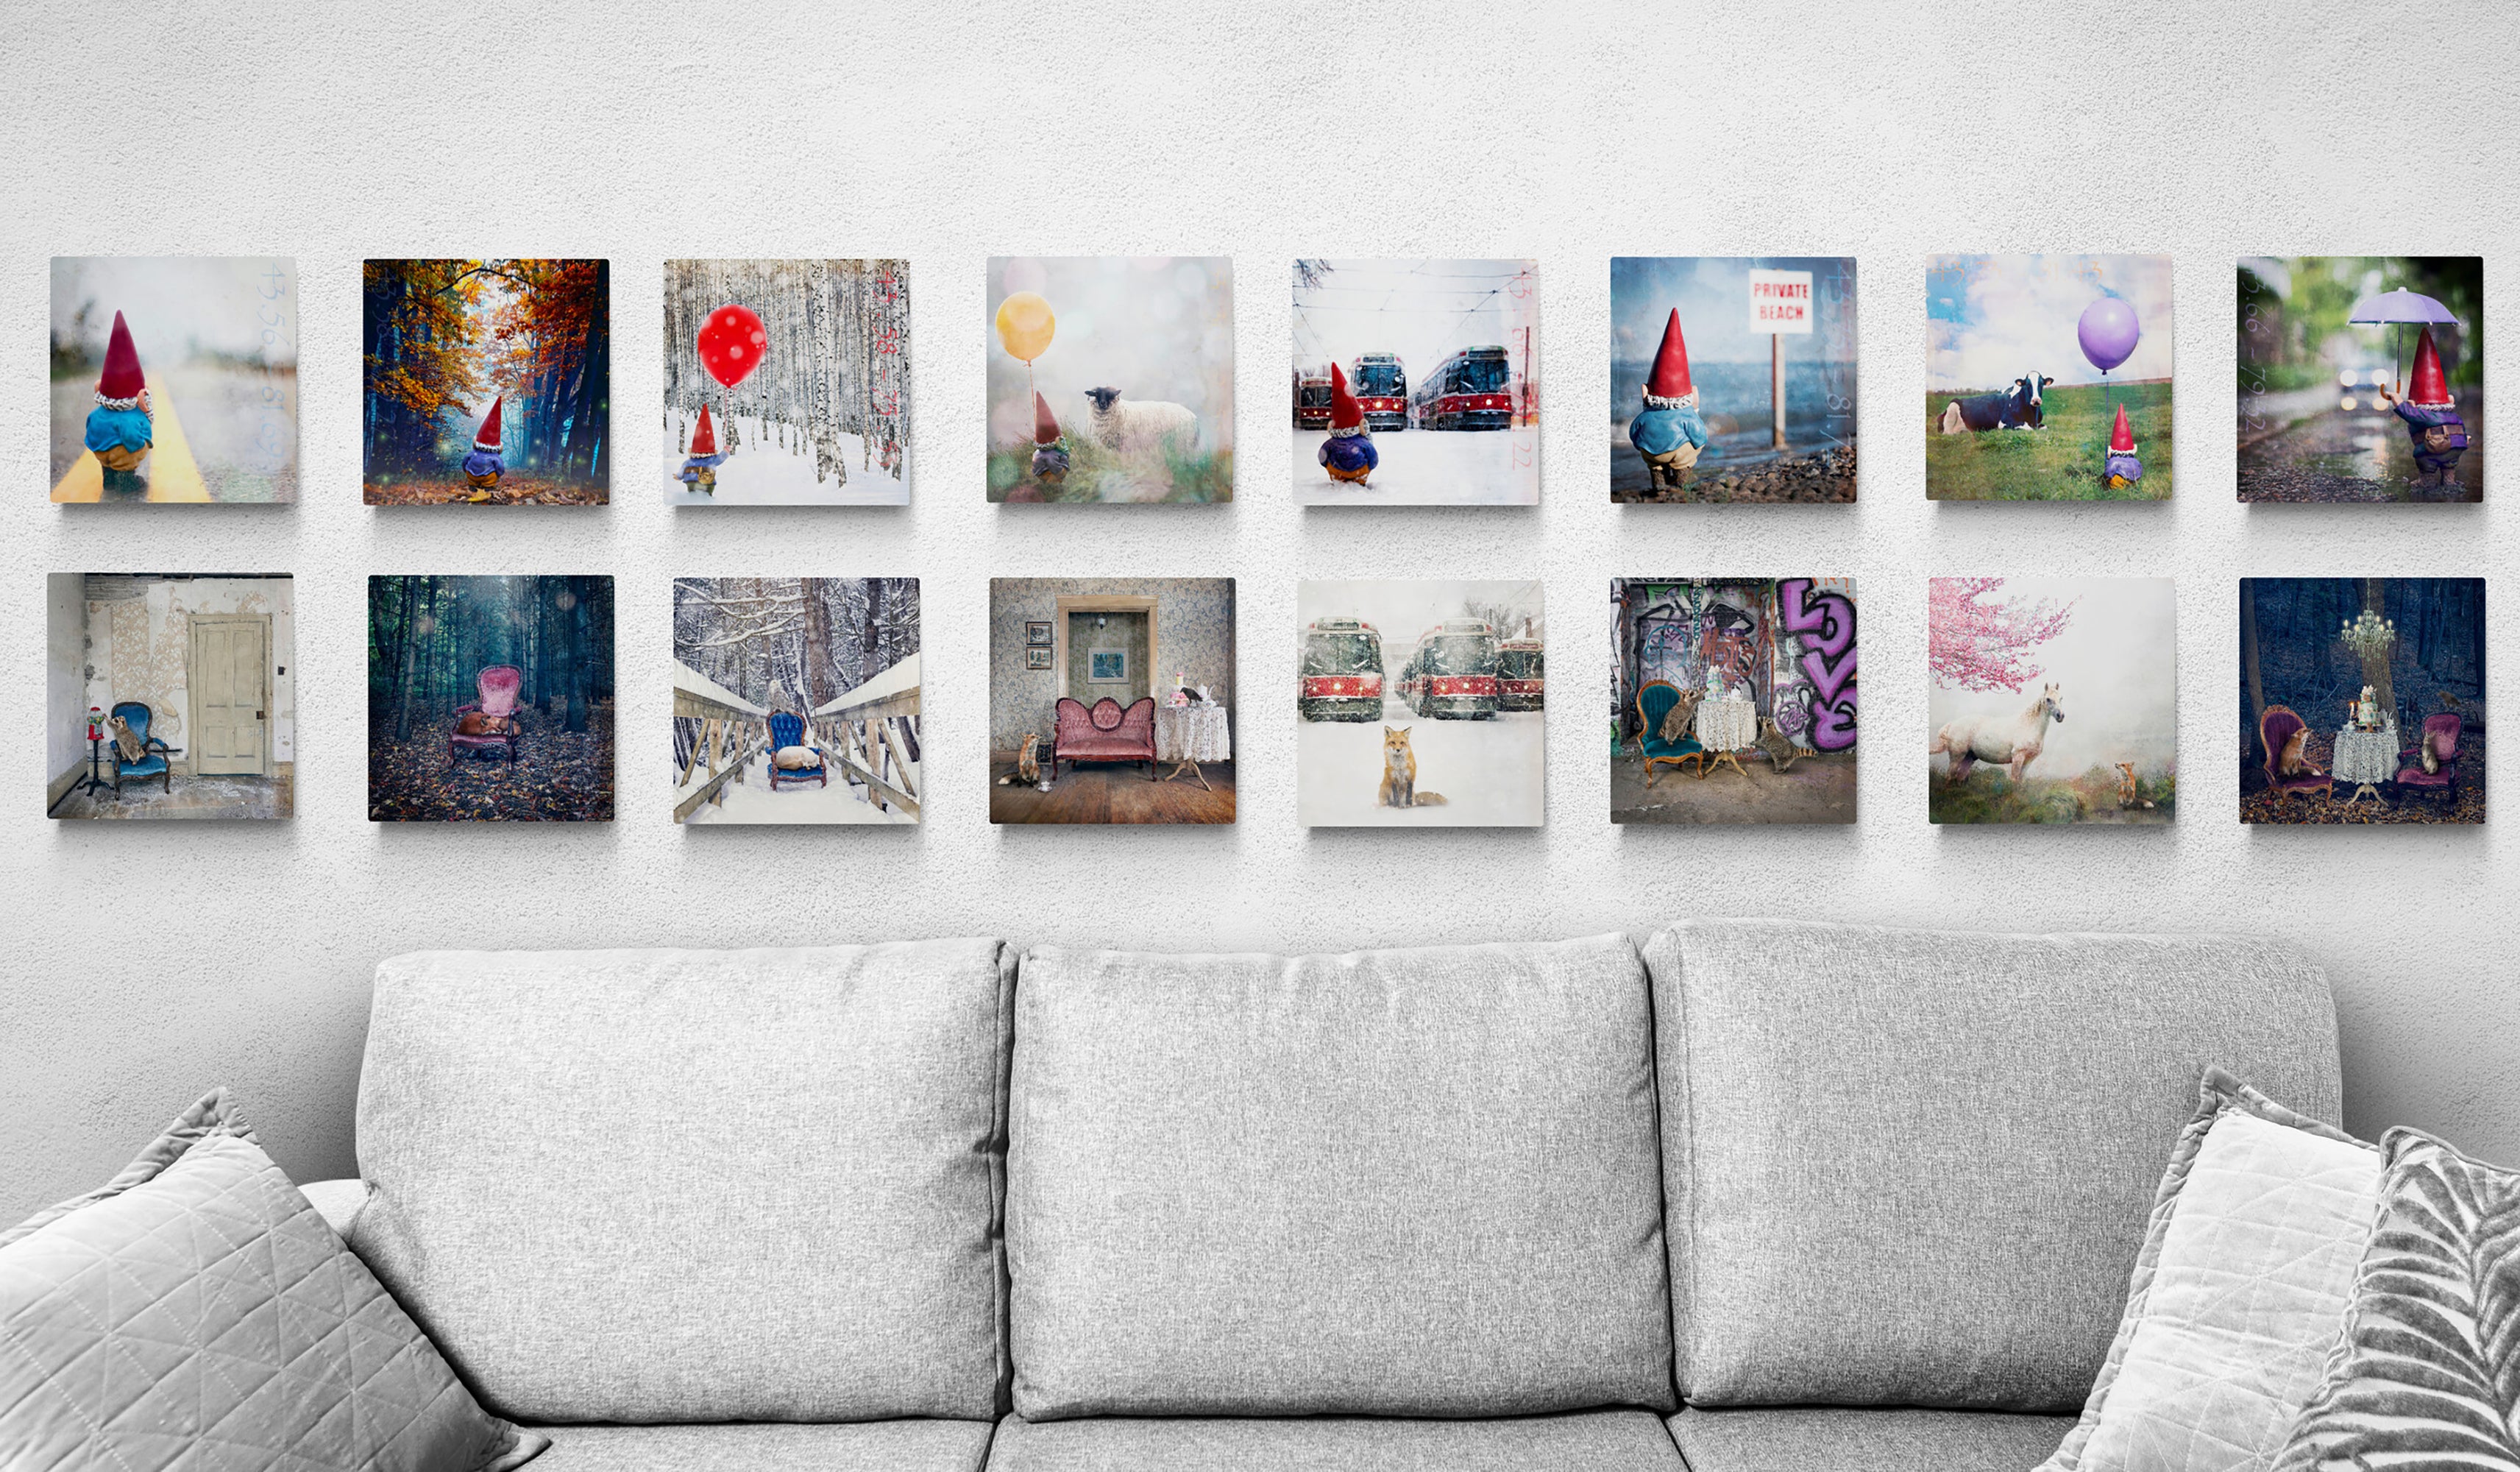 Paintings hung in a grid over a couch.